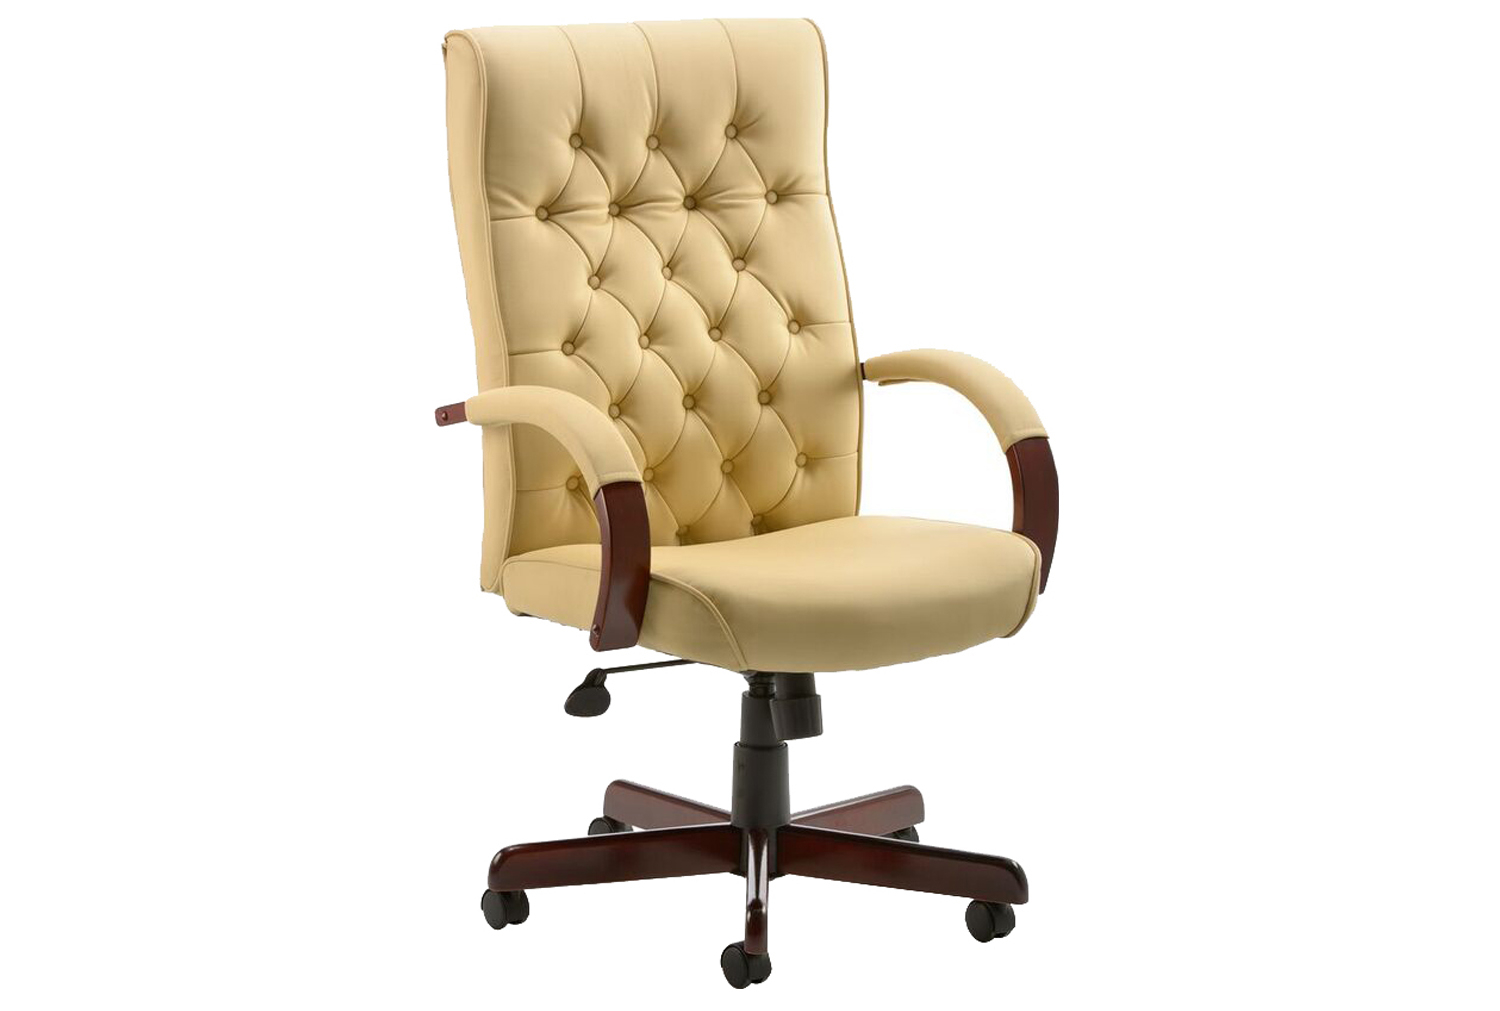 Tronso Traditional Leather Office ArmOffice Chair Cream, Fully Installed